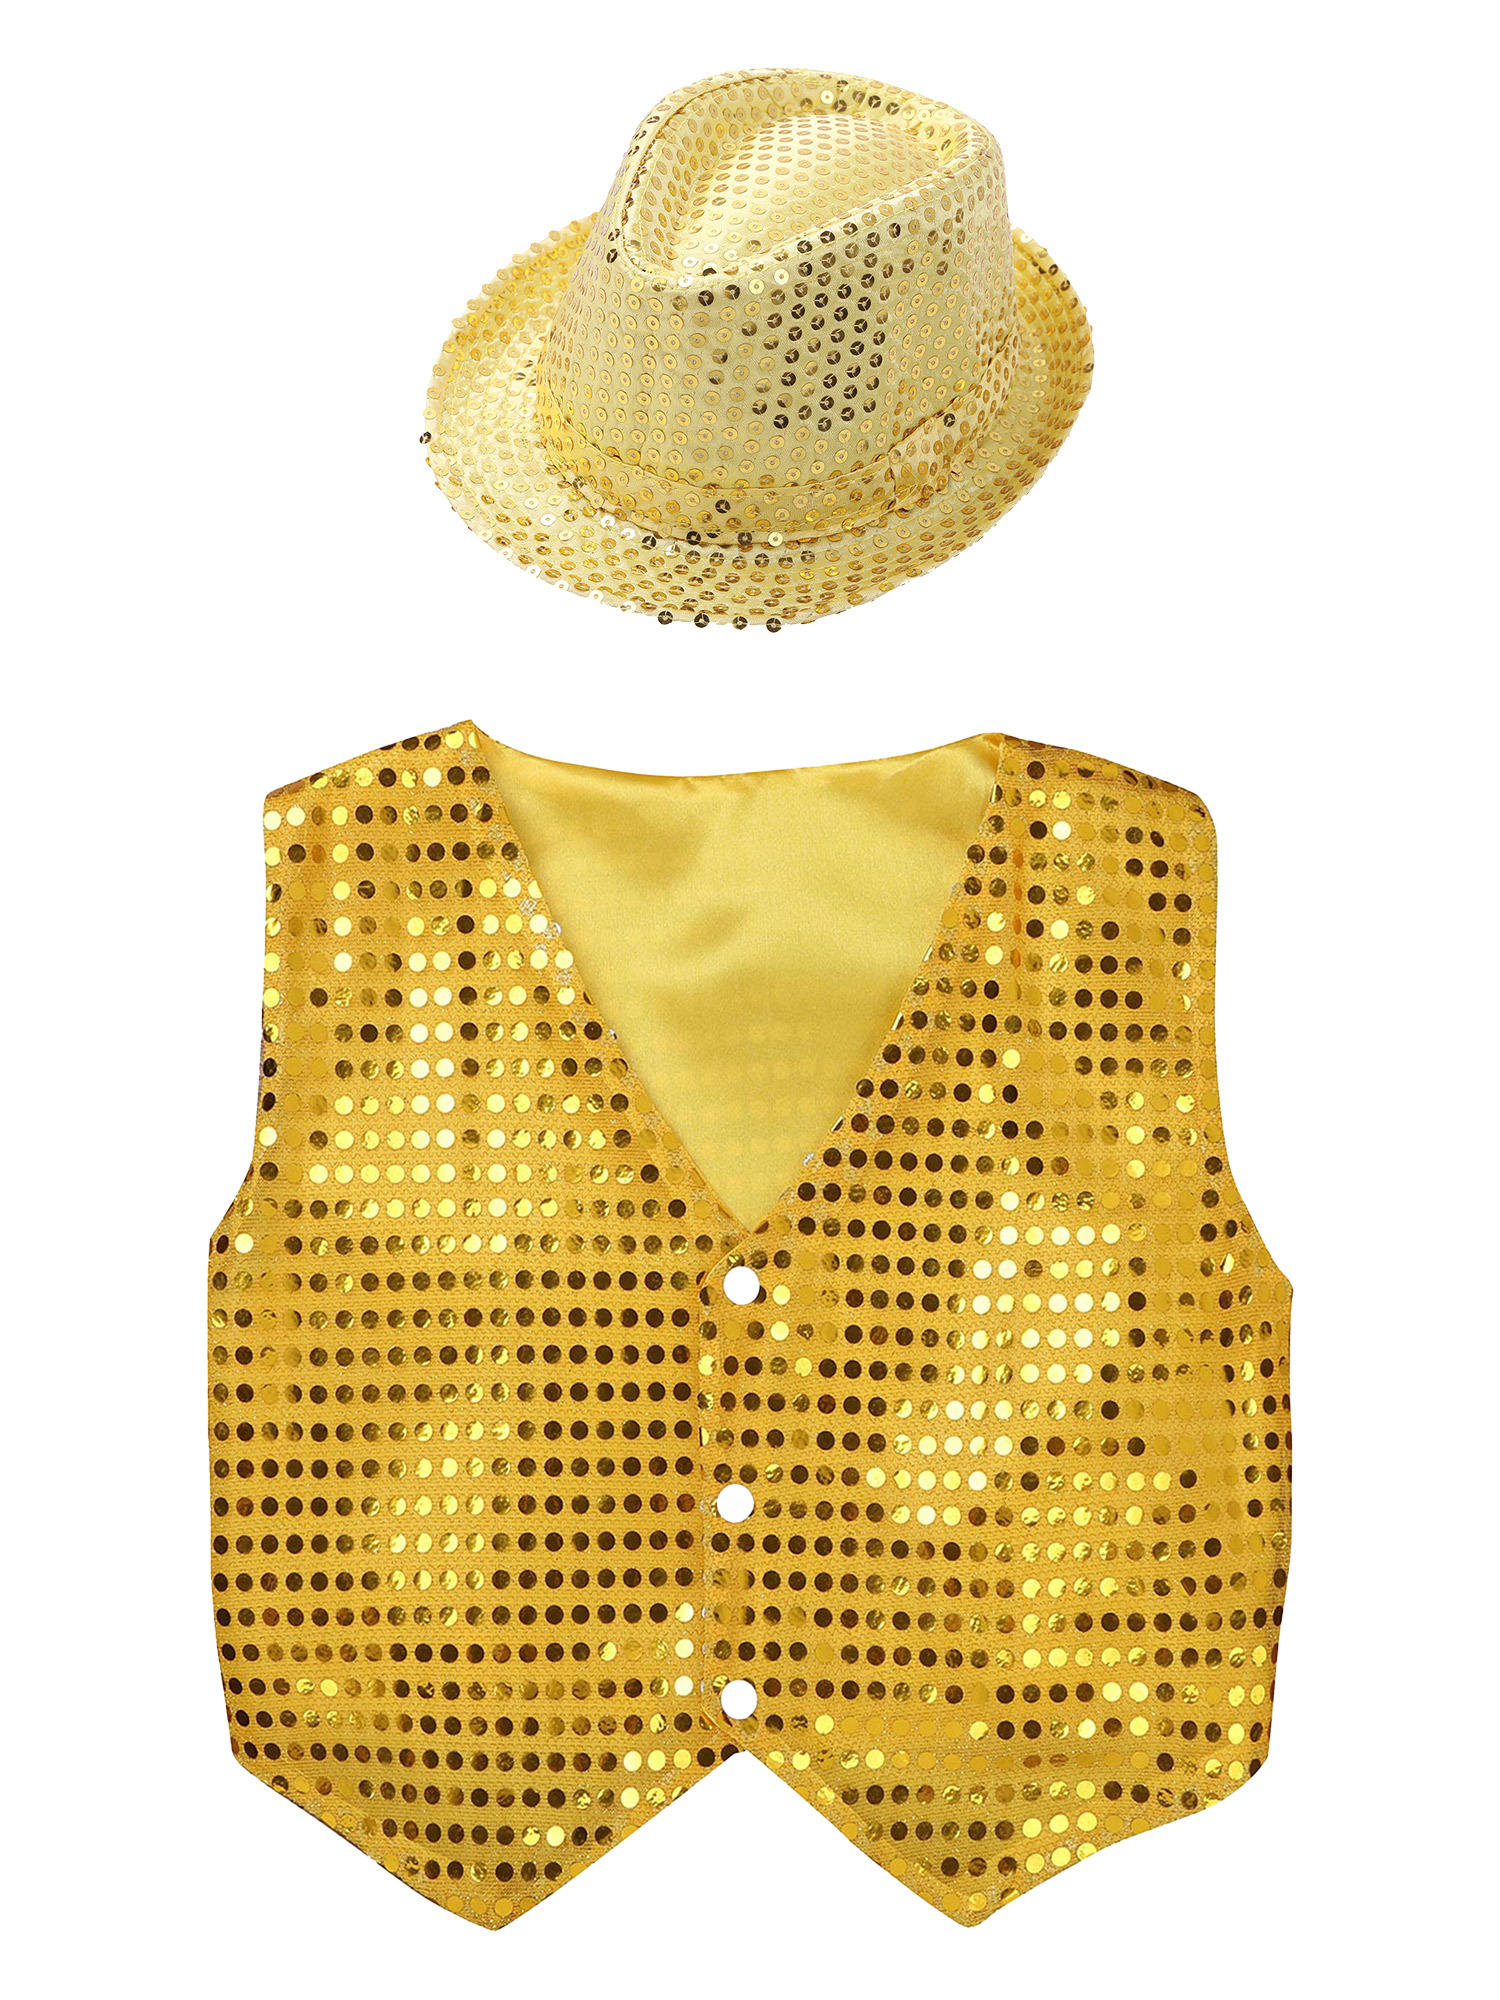 IEFIEL Kids Boys Sparkle Sequins Button Down Vest with Hat Dance Outfit Set Hip Hop Jazz Stage Performance Costume Gold 11-12 - image 3 of 7